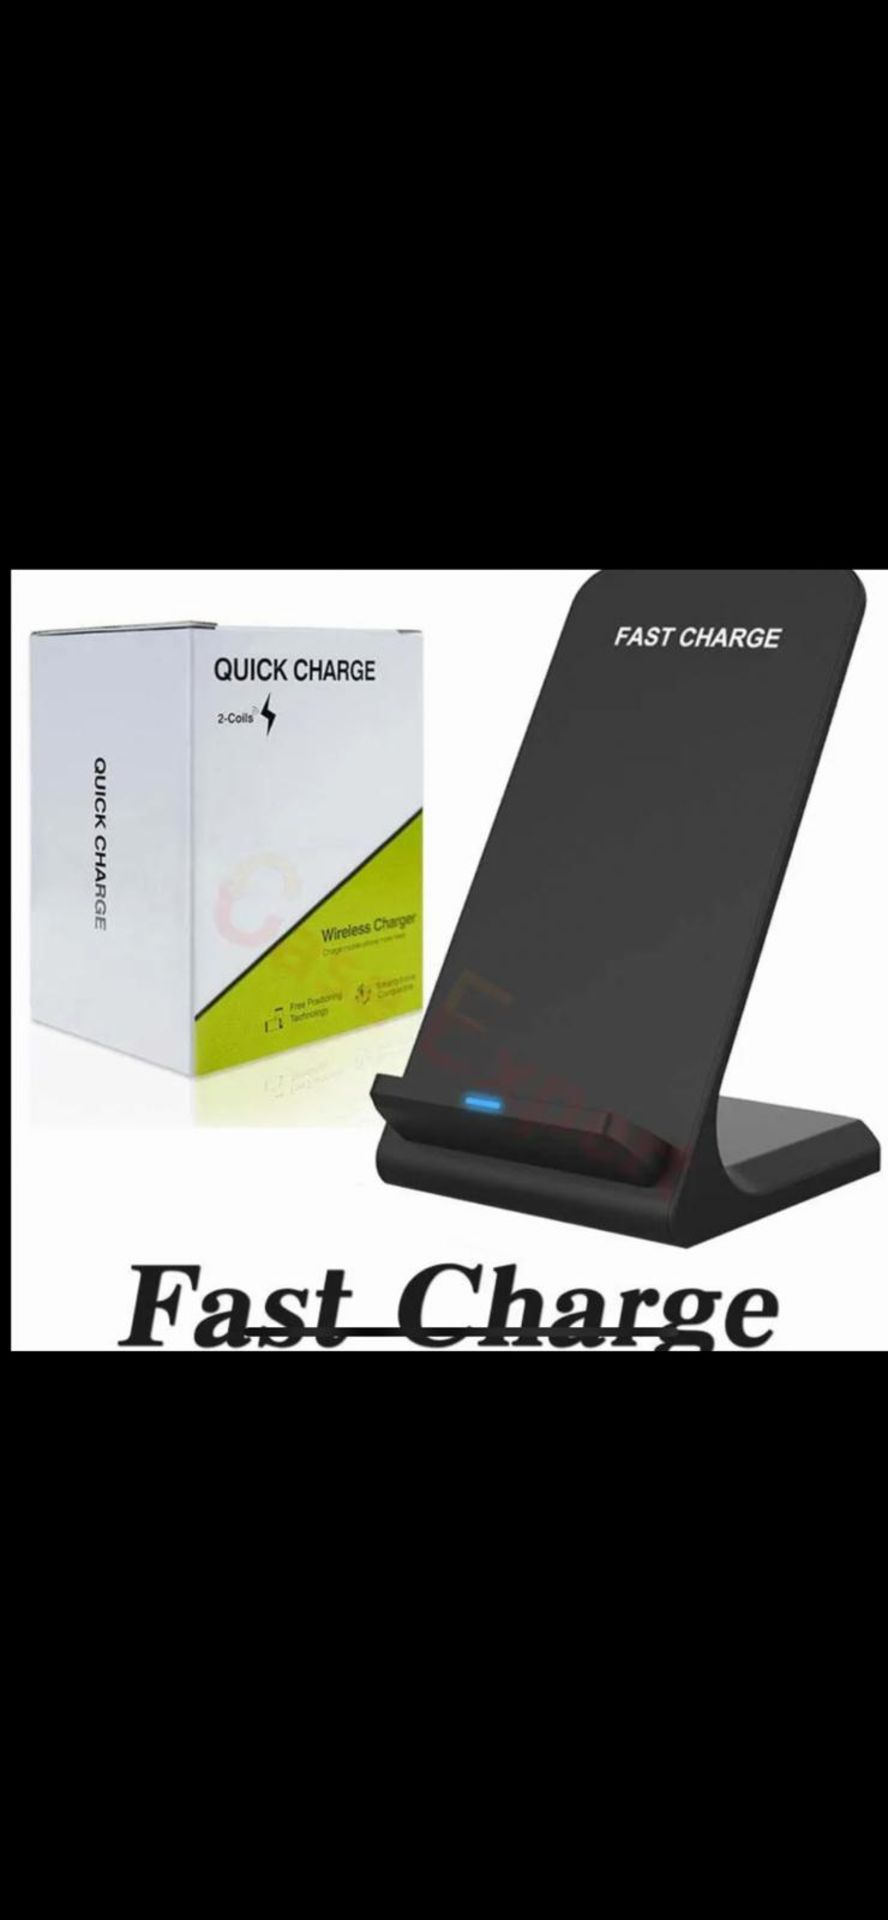 Quick Charge Wireless Charger 2.0 Two Coil  - (NEW) - RRP Â£17.99 ! - Image 4 of 8